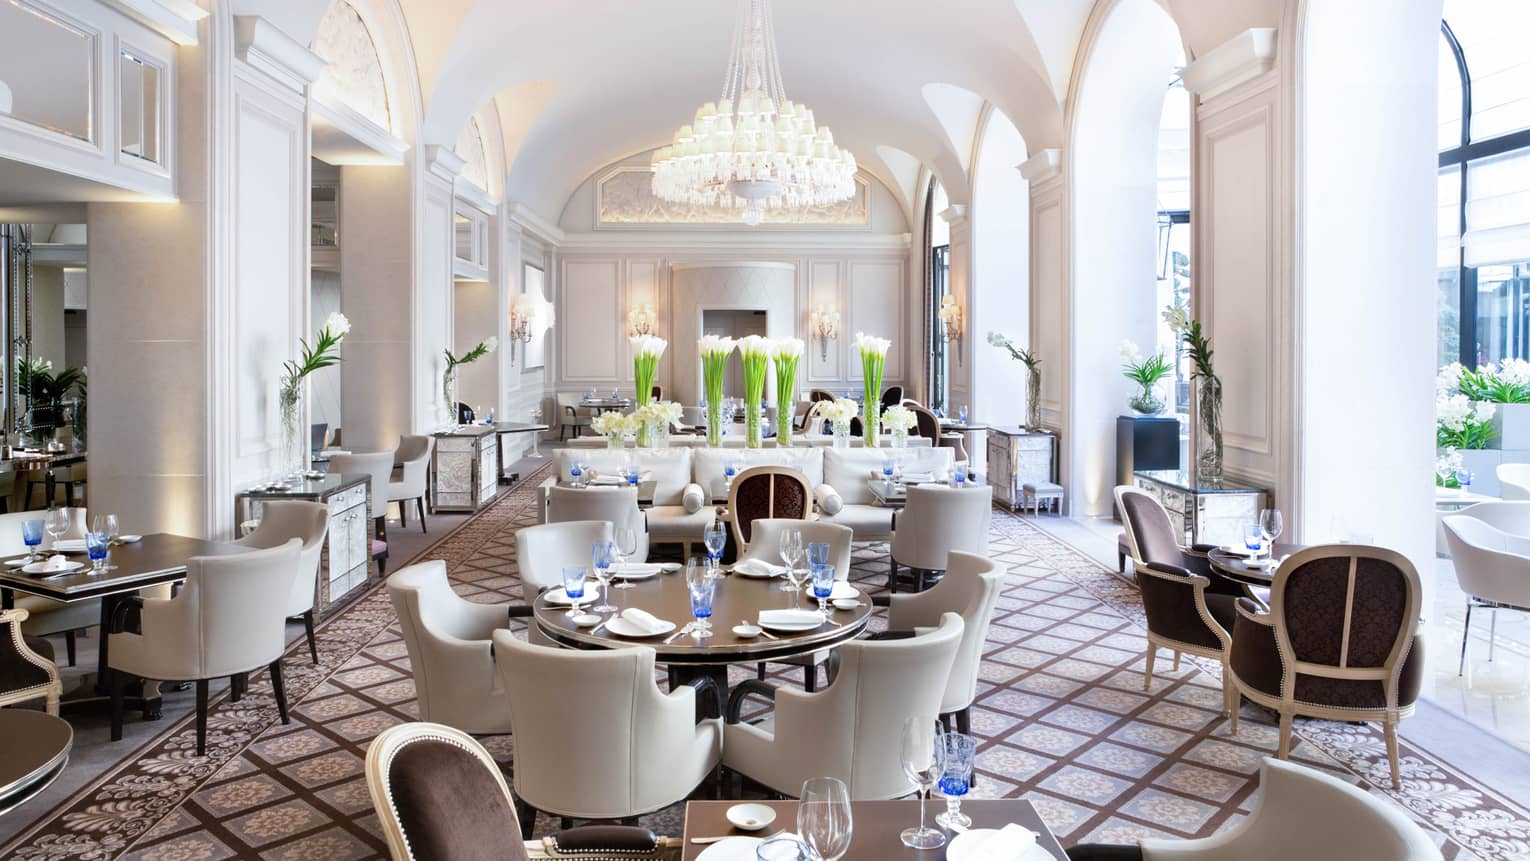 Bright Le George dining room, white chairs around tables under arched pillows, chandeliers